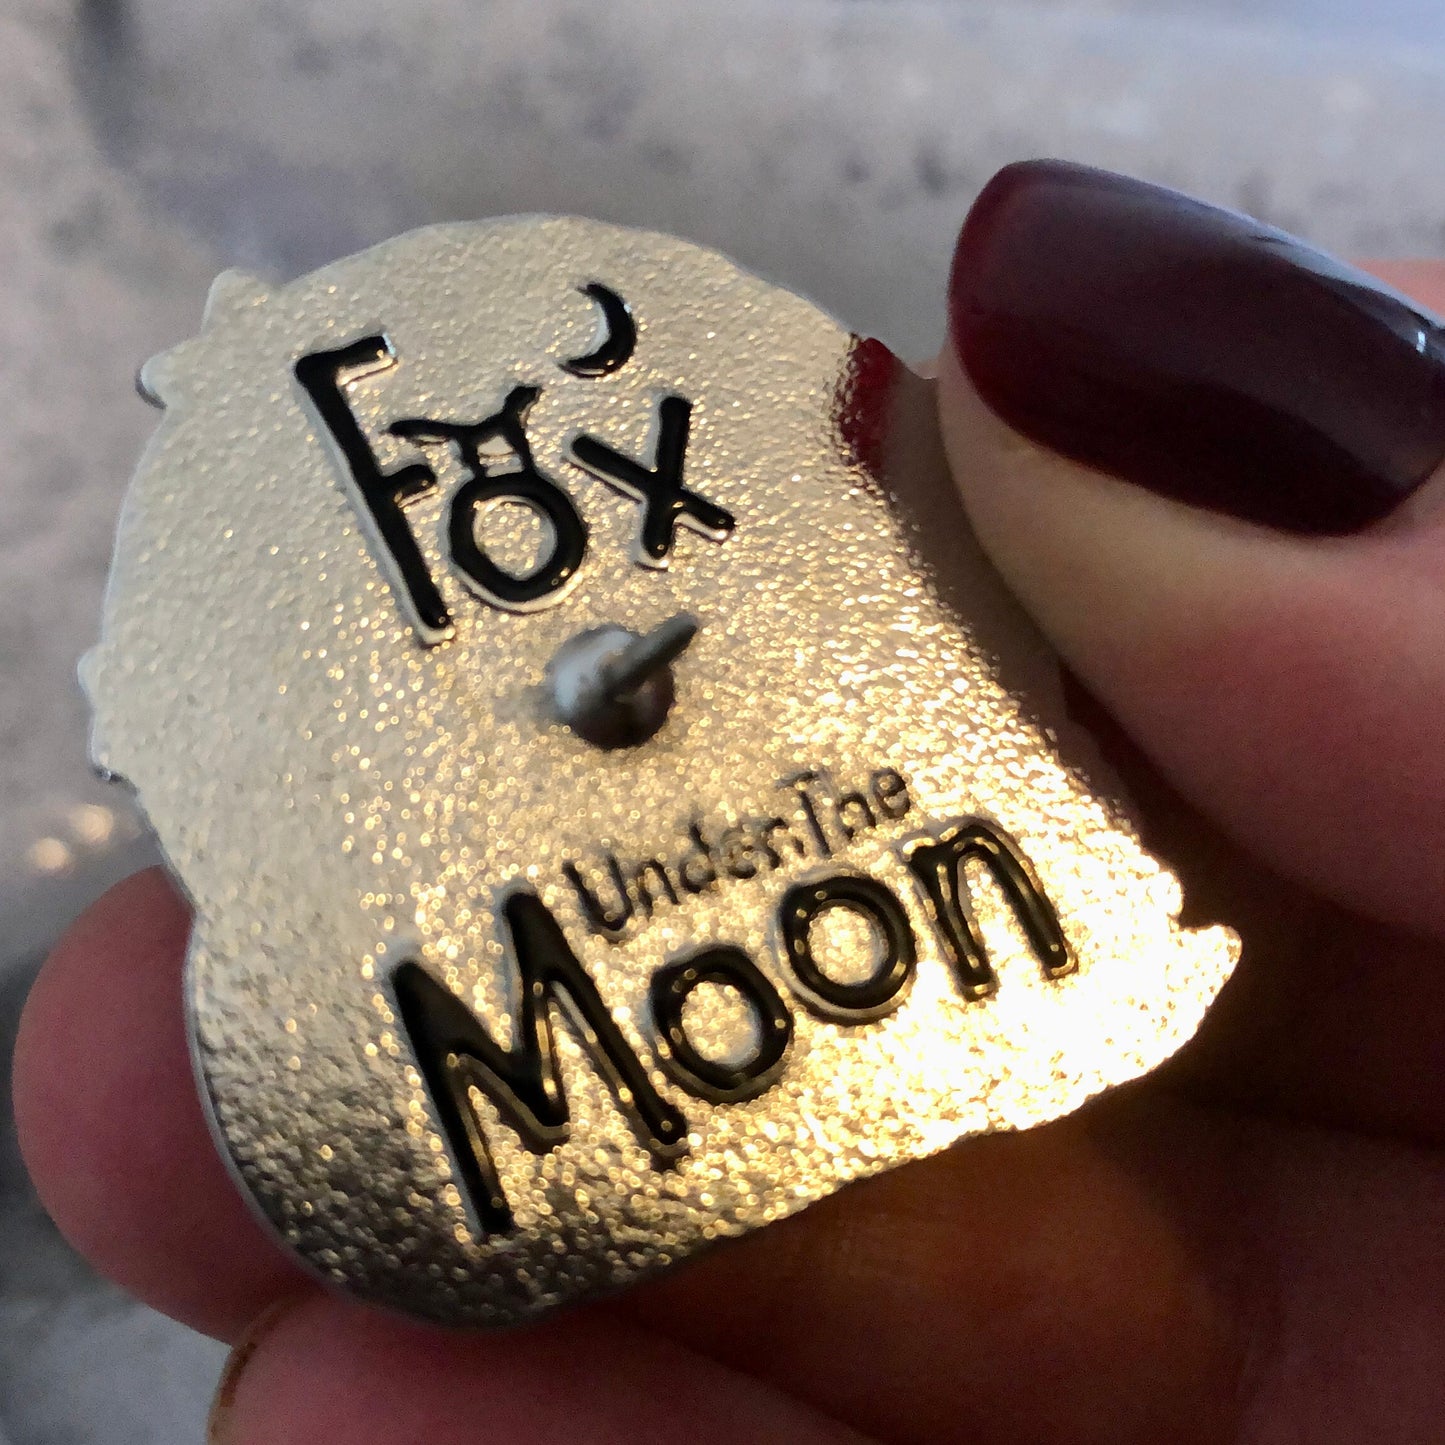 Official Enamel Pin by Fox Under The Moon